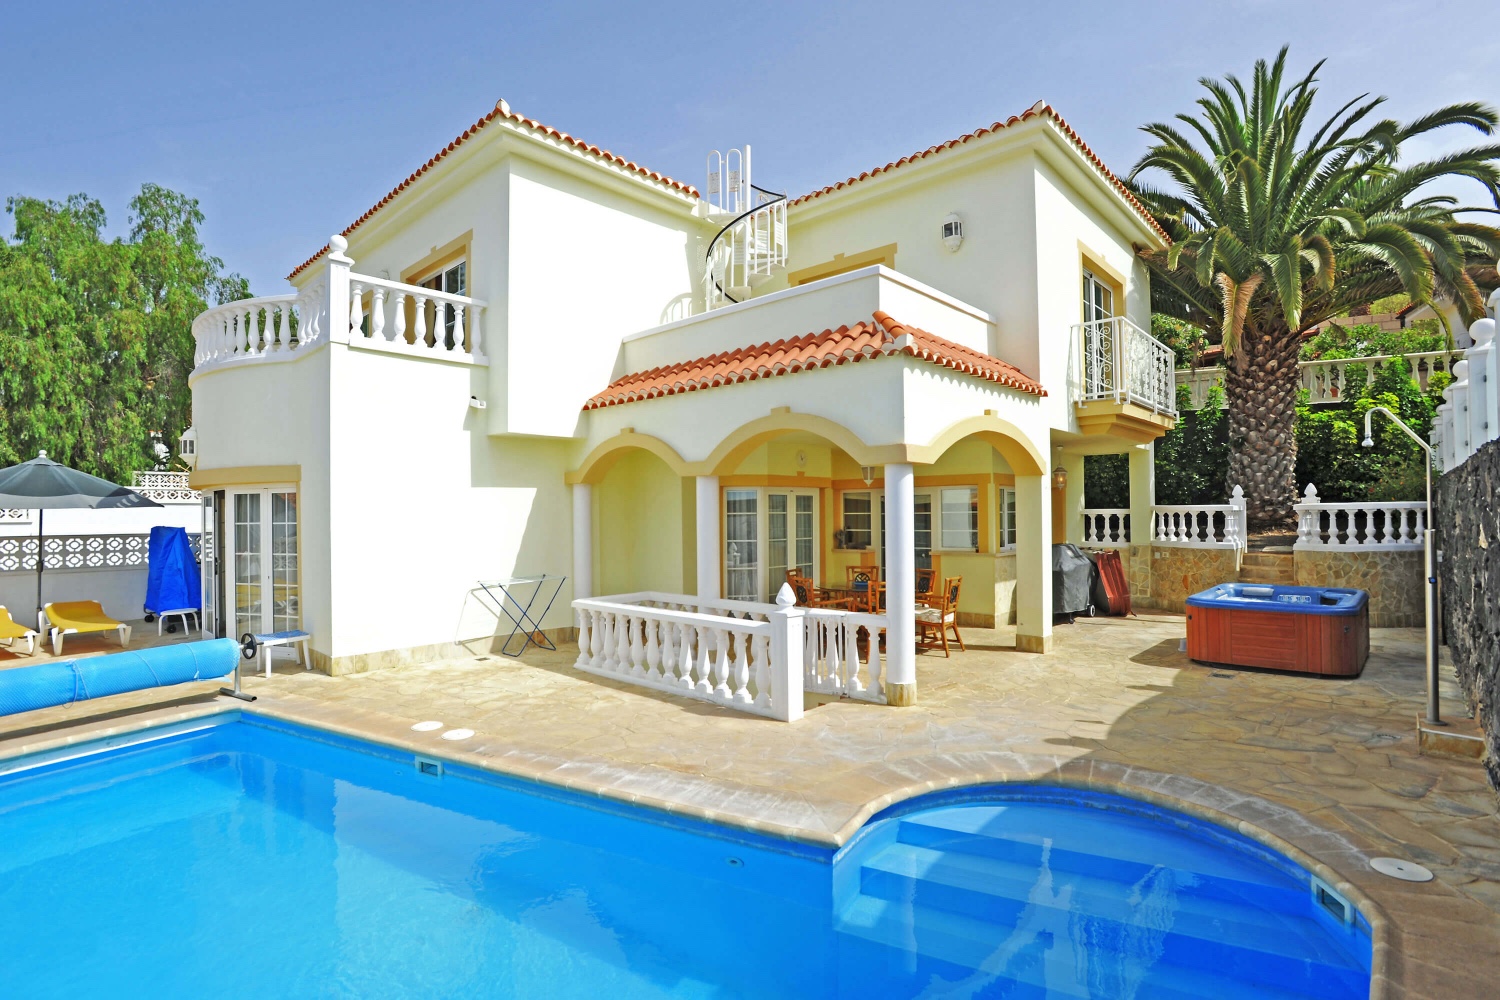 Spacious holiday home with pool for a relaxing holiday in the residential area of Chayofa